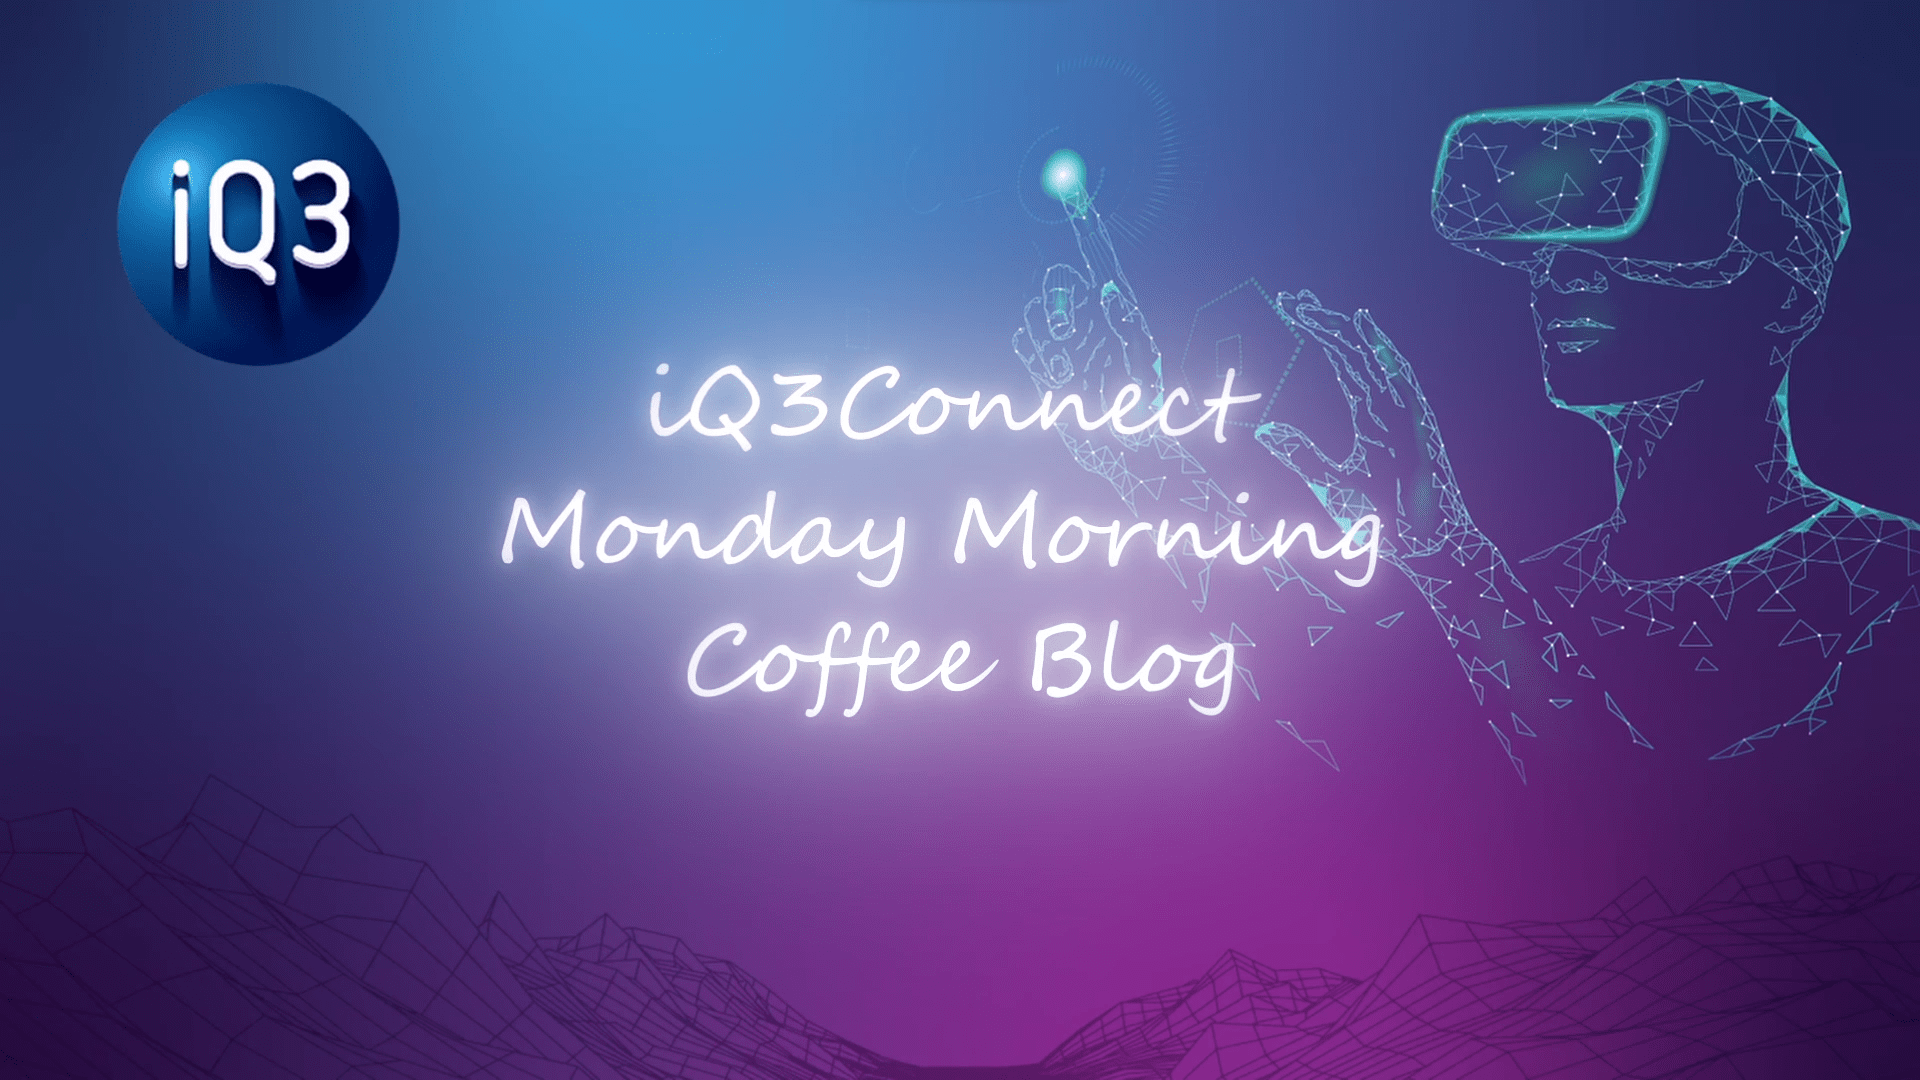 Monday Morning Coffee Blog - XR Device Requirements